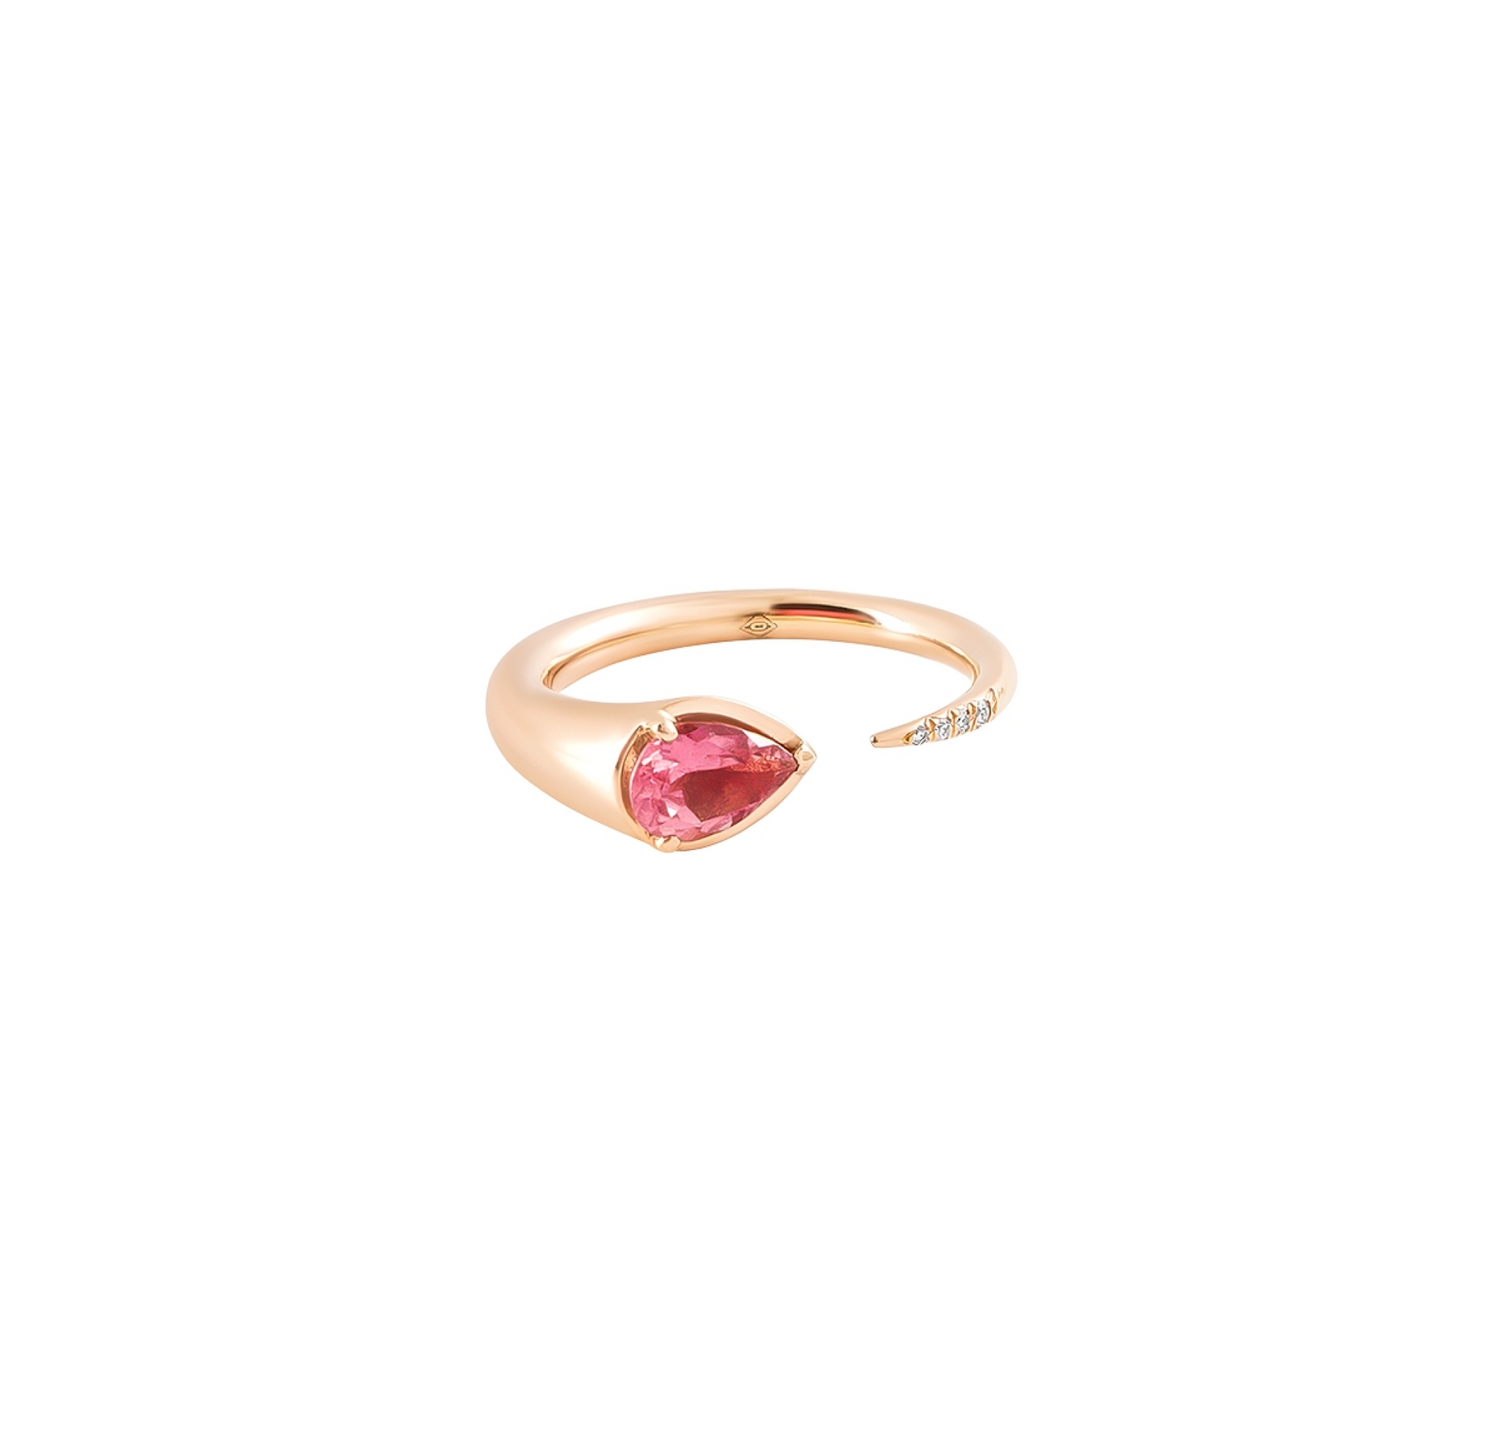 Sornette ring, tourmaline, and yellow gold